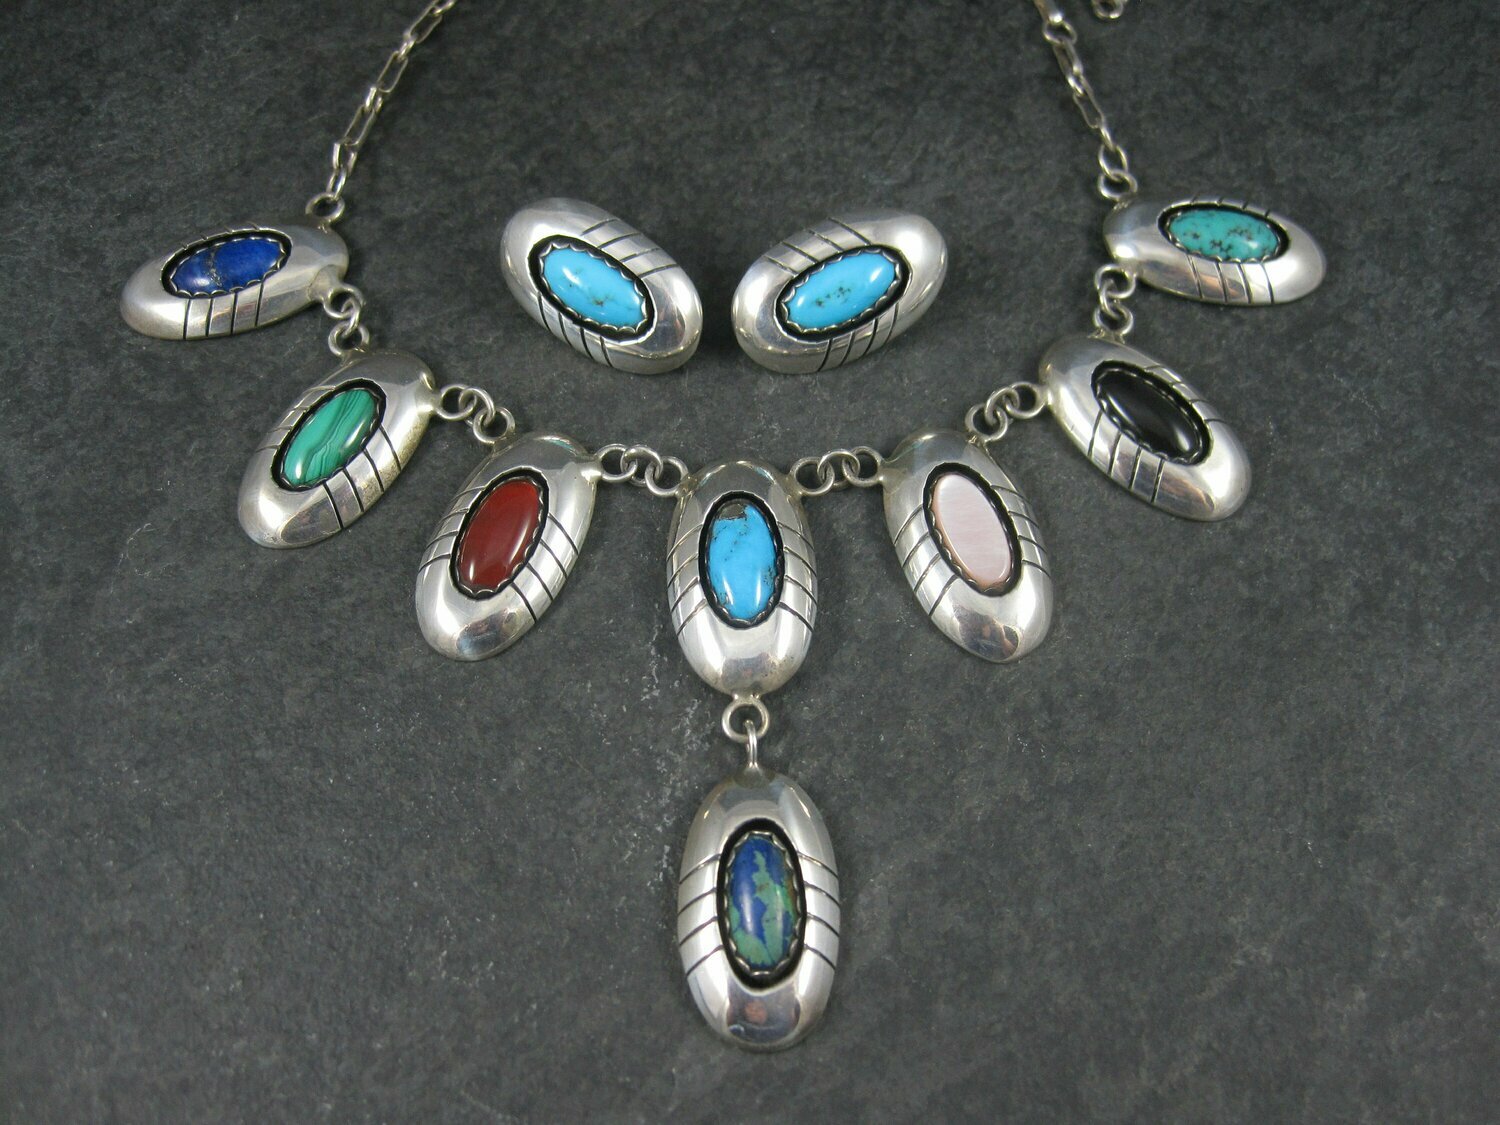 Vintage Navajo Multi Stone Necklace and Earrings Native American Jewelry Set